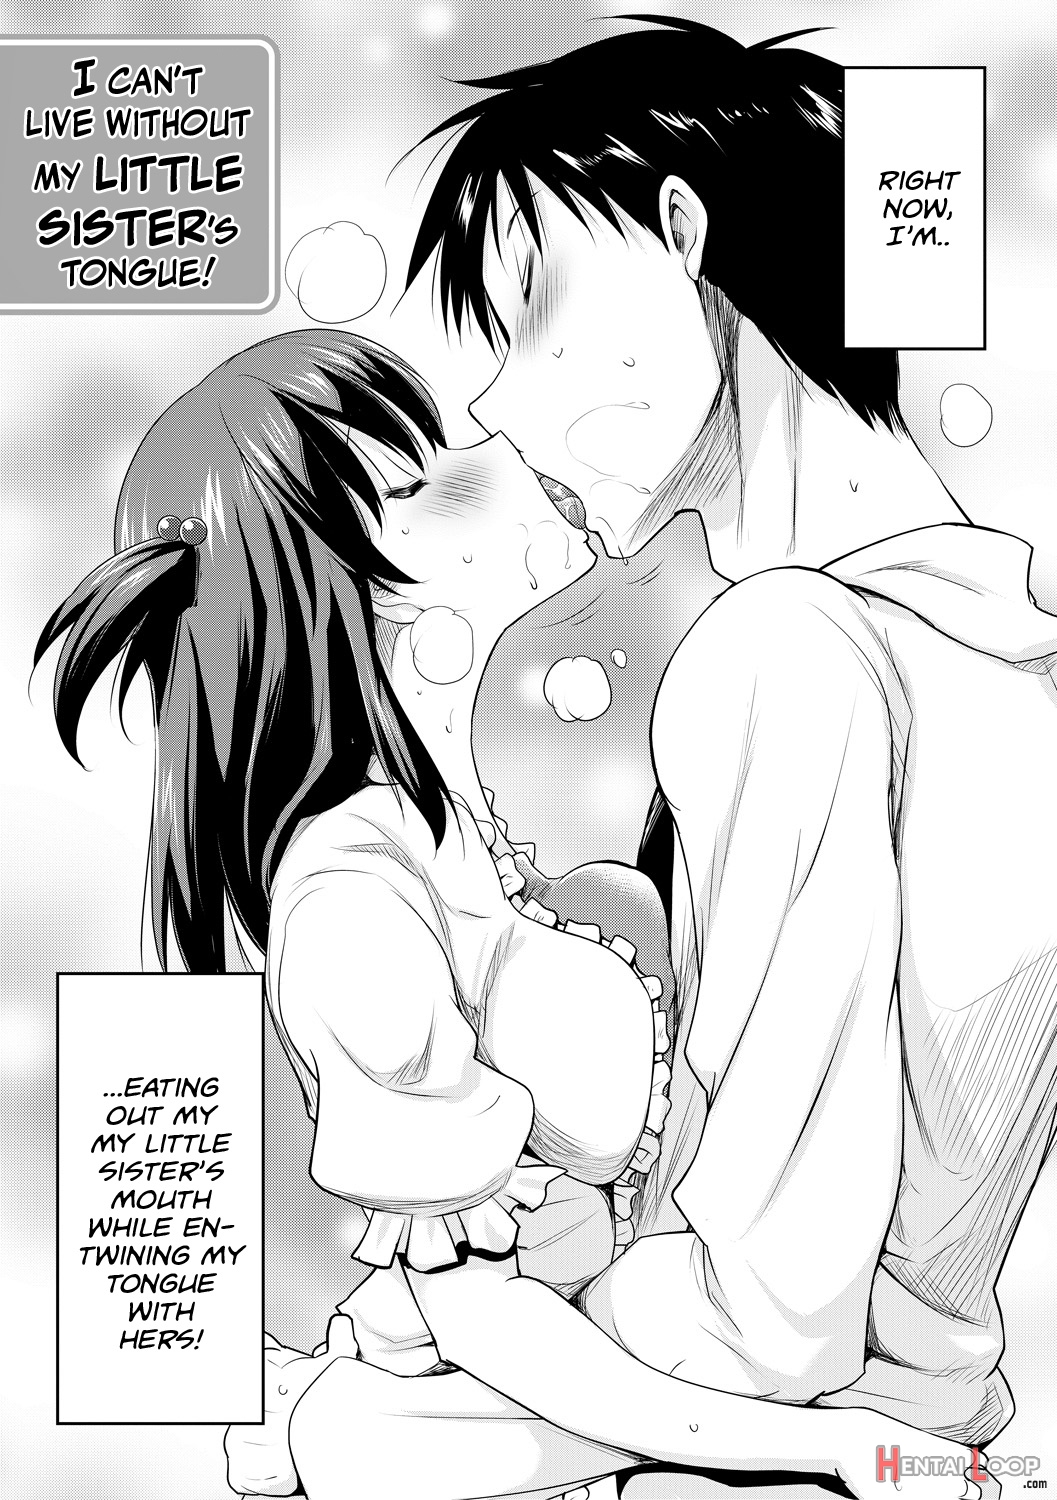 I Can't Live Without My Little Sister's Tongue Chapter 01-02 + Secret Baby-making Sex With A Big-titted Mother And Daughter! page 3